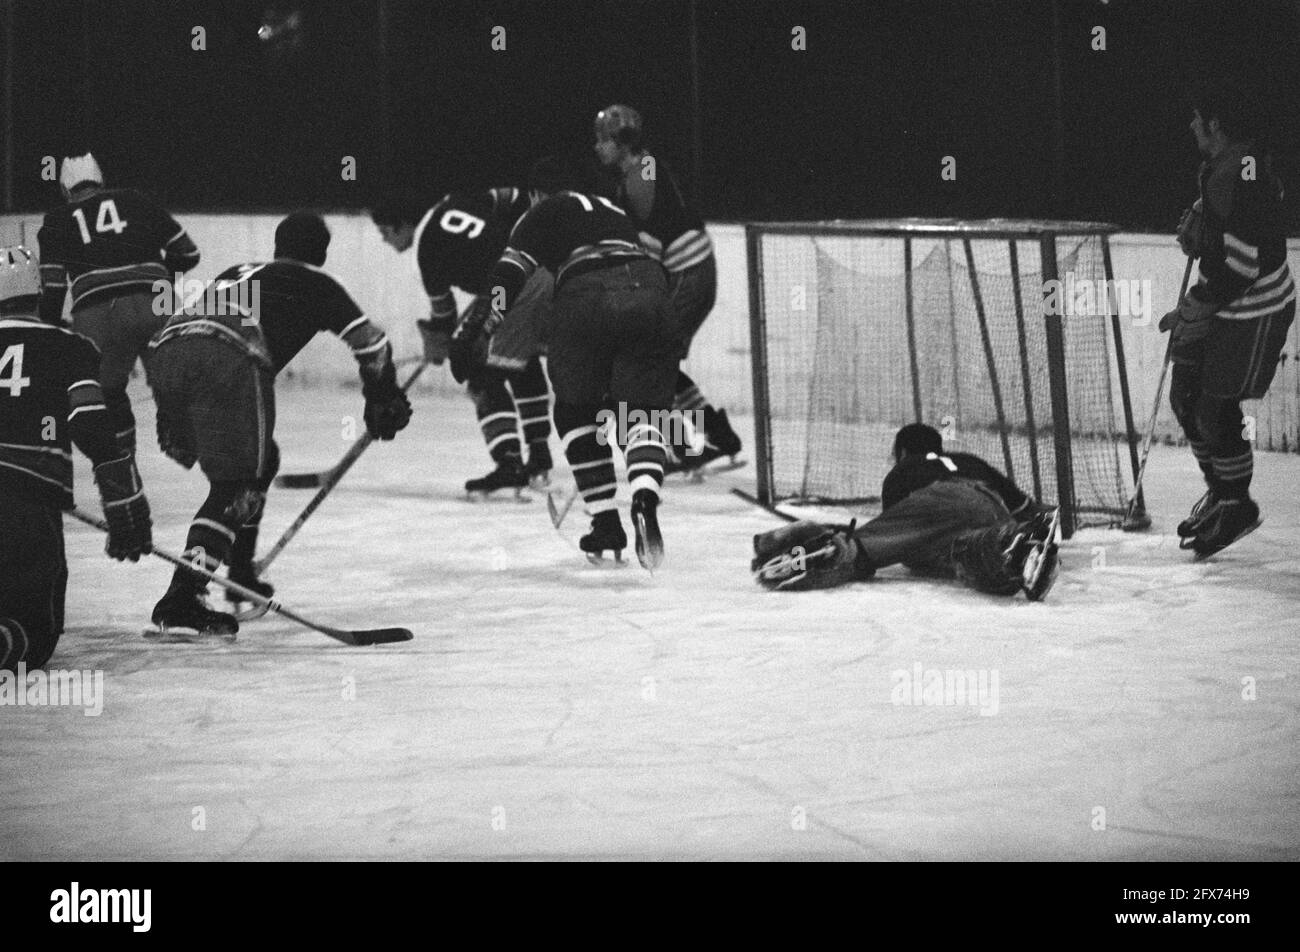 Ice hockey game AYC against Amsteltijgers on Jaap Eden rink Amsterdam 0-8. Game January 1970, IJSHOCKEY, The Netherlands, 20th century press agency photo, news to remember, documentary, historic photography 1945-1990,